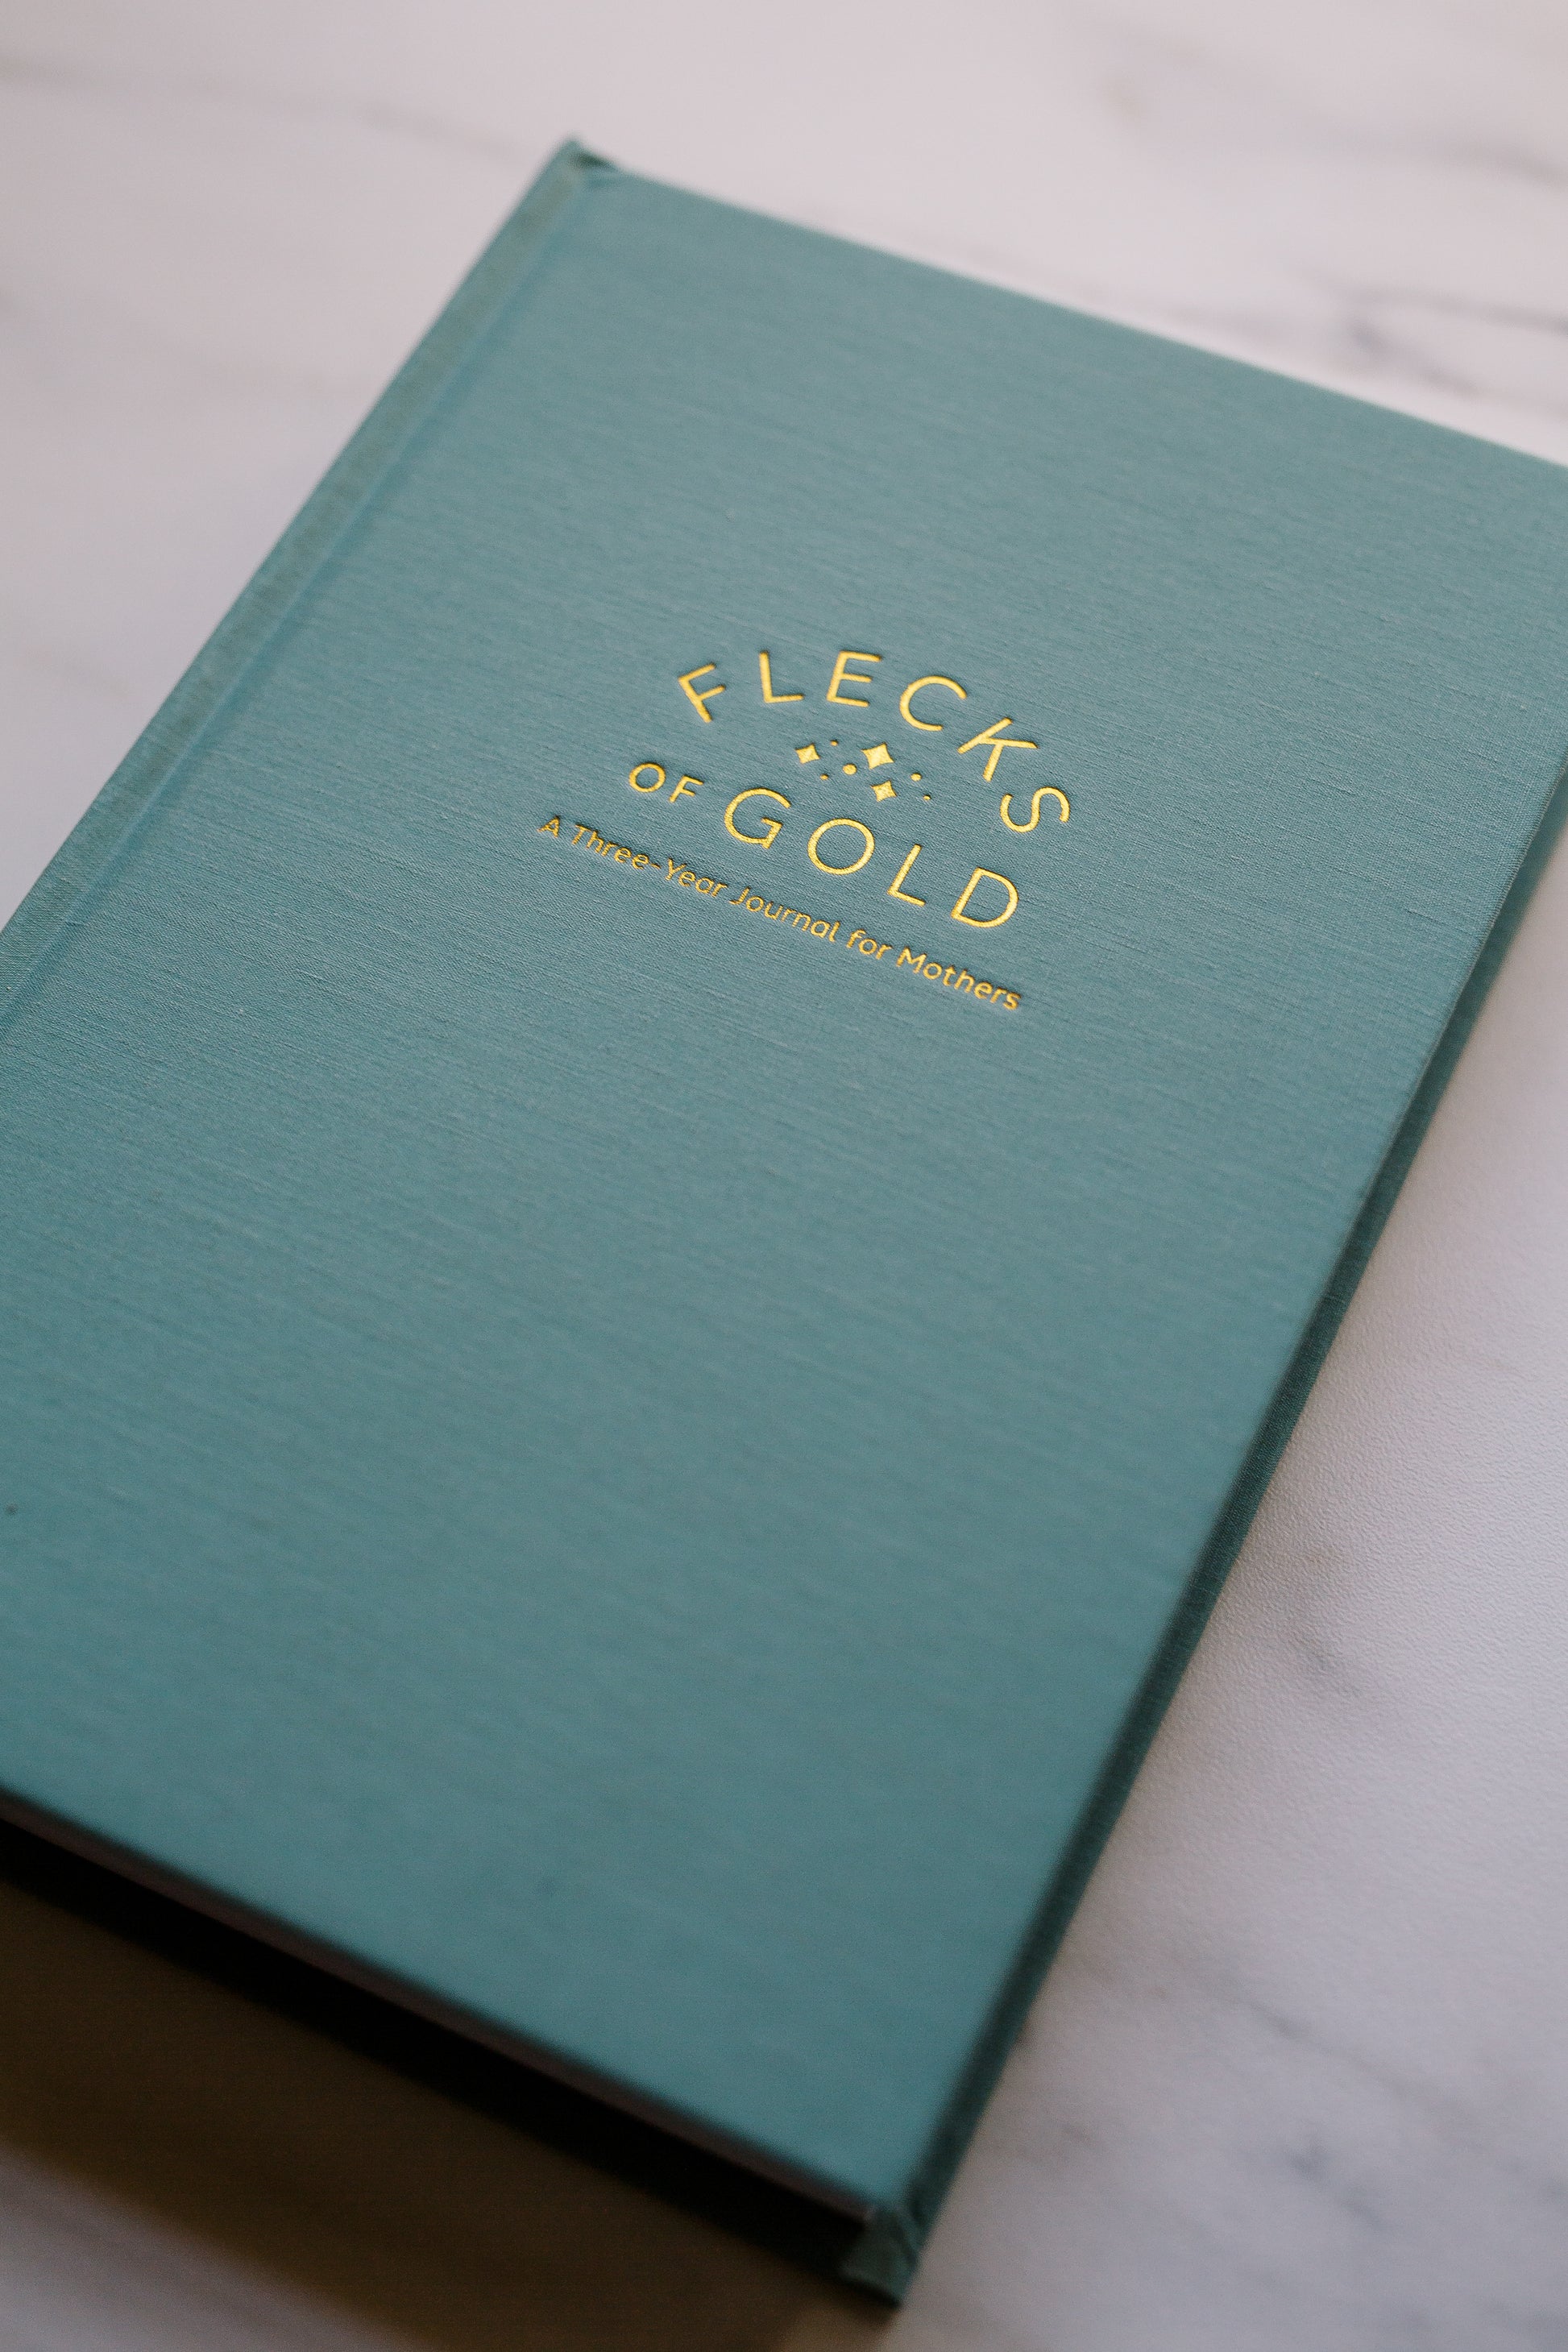 Beautiful Flecks of Gold Journal. Motherhood journal created by Rachel Nielson (host of the 3 in 30 Takeaways for Moms Podcast). A journal to help overwhelmed moms see the good, the magic, the gold in their everyday lives. Gold embossing.